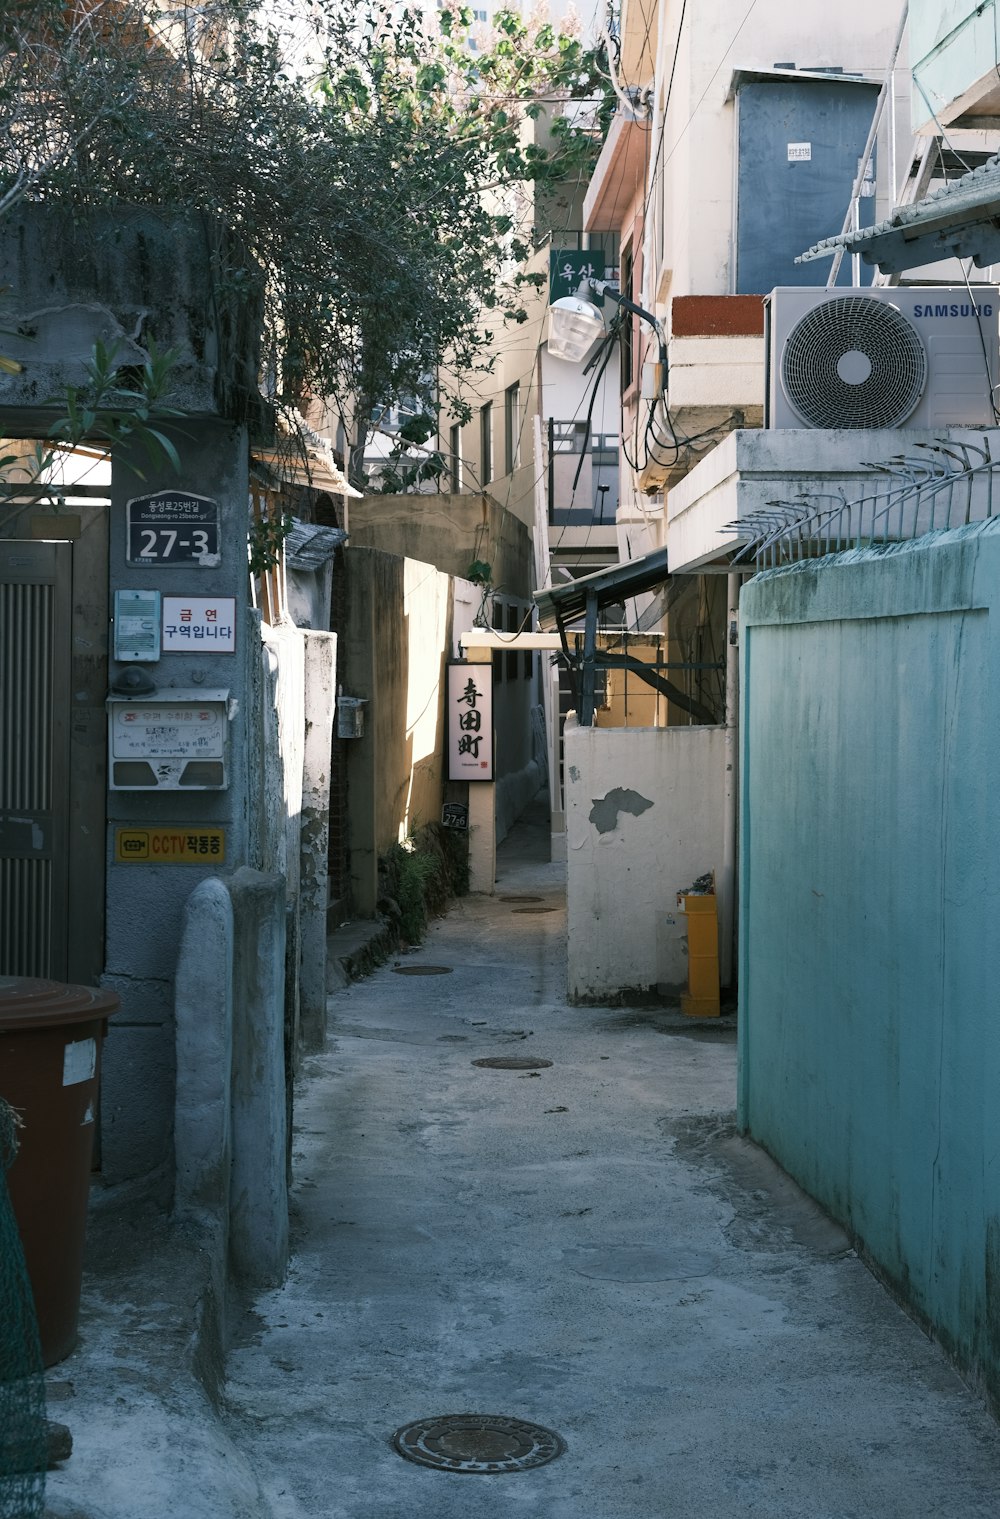 a narrow alley way with a fan on the wall